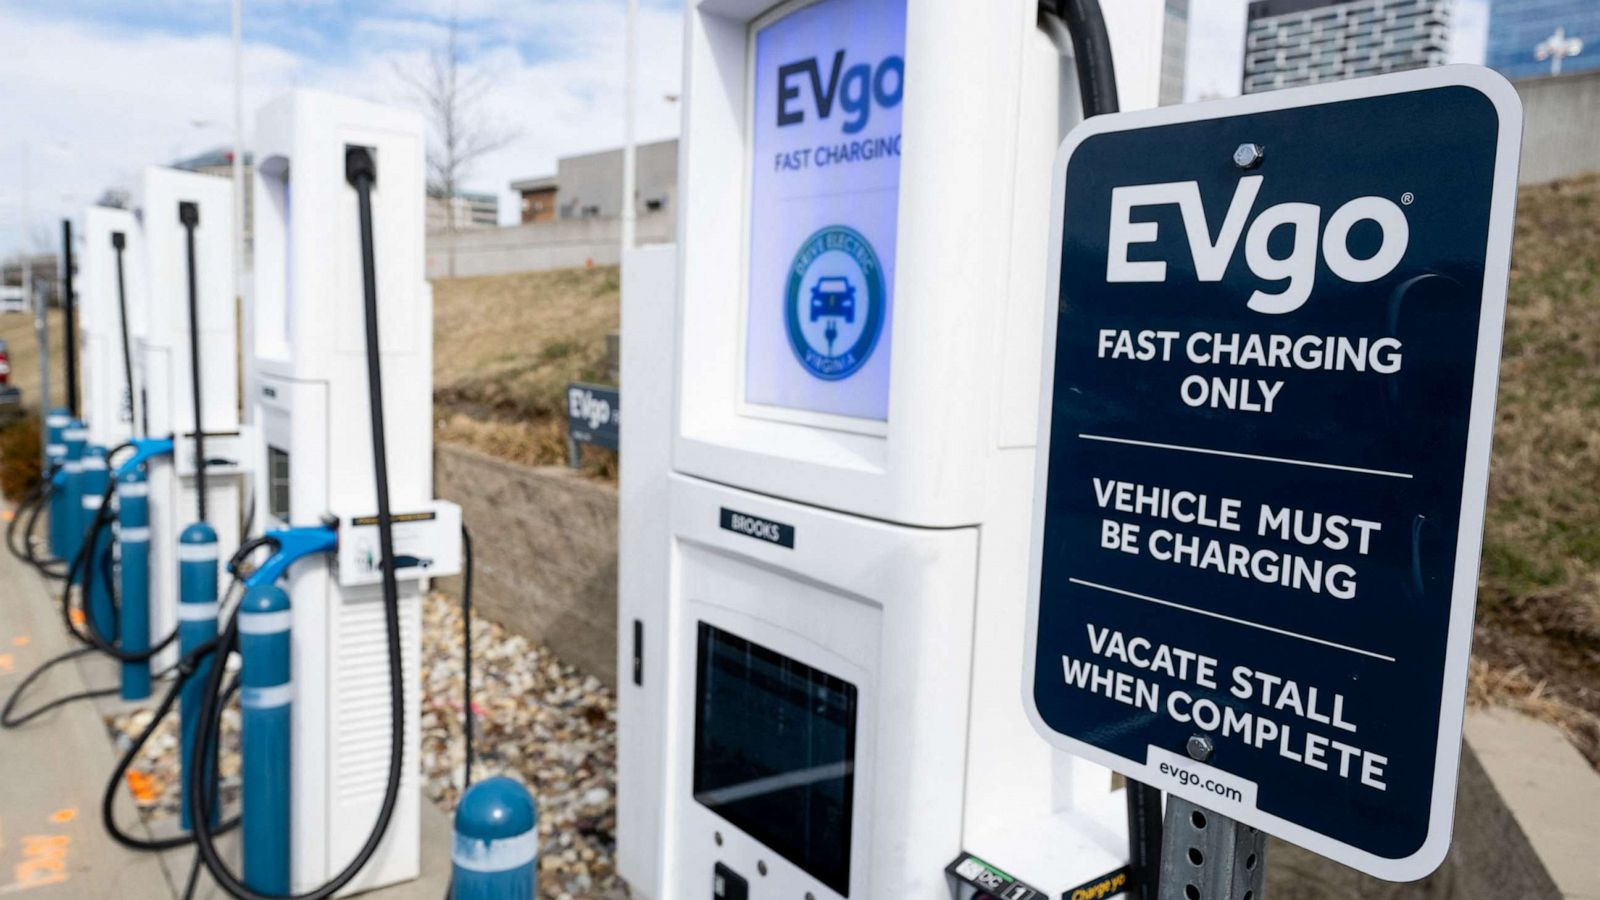 Electric vehicle drivers get candid about charging 'Logistical